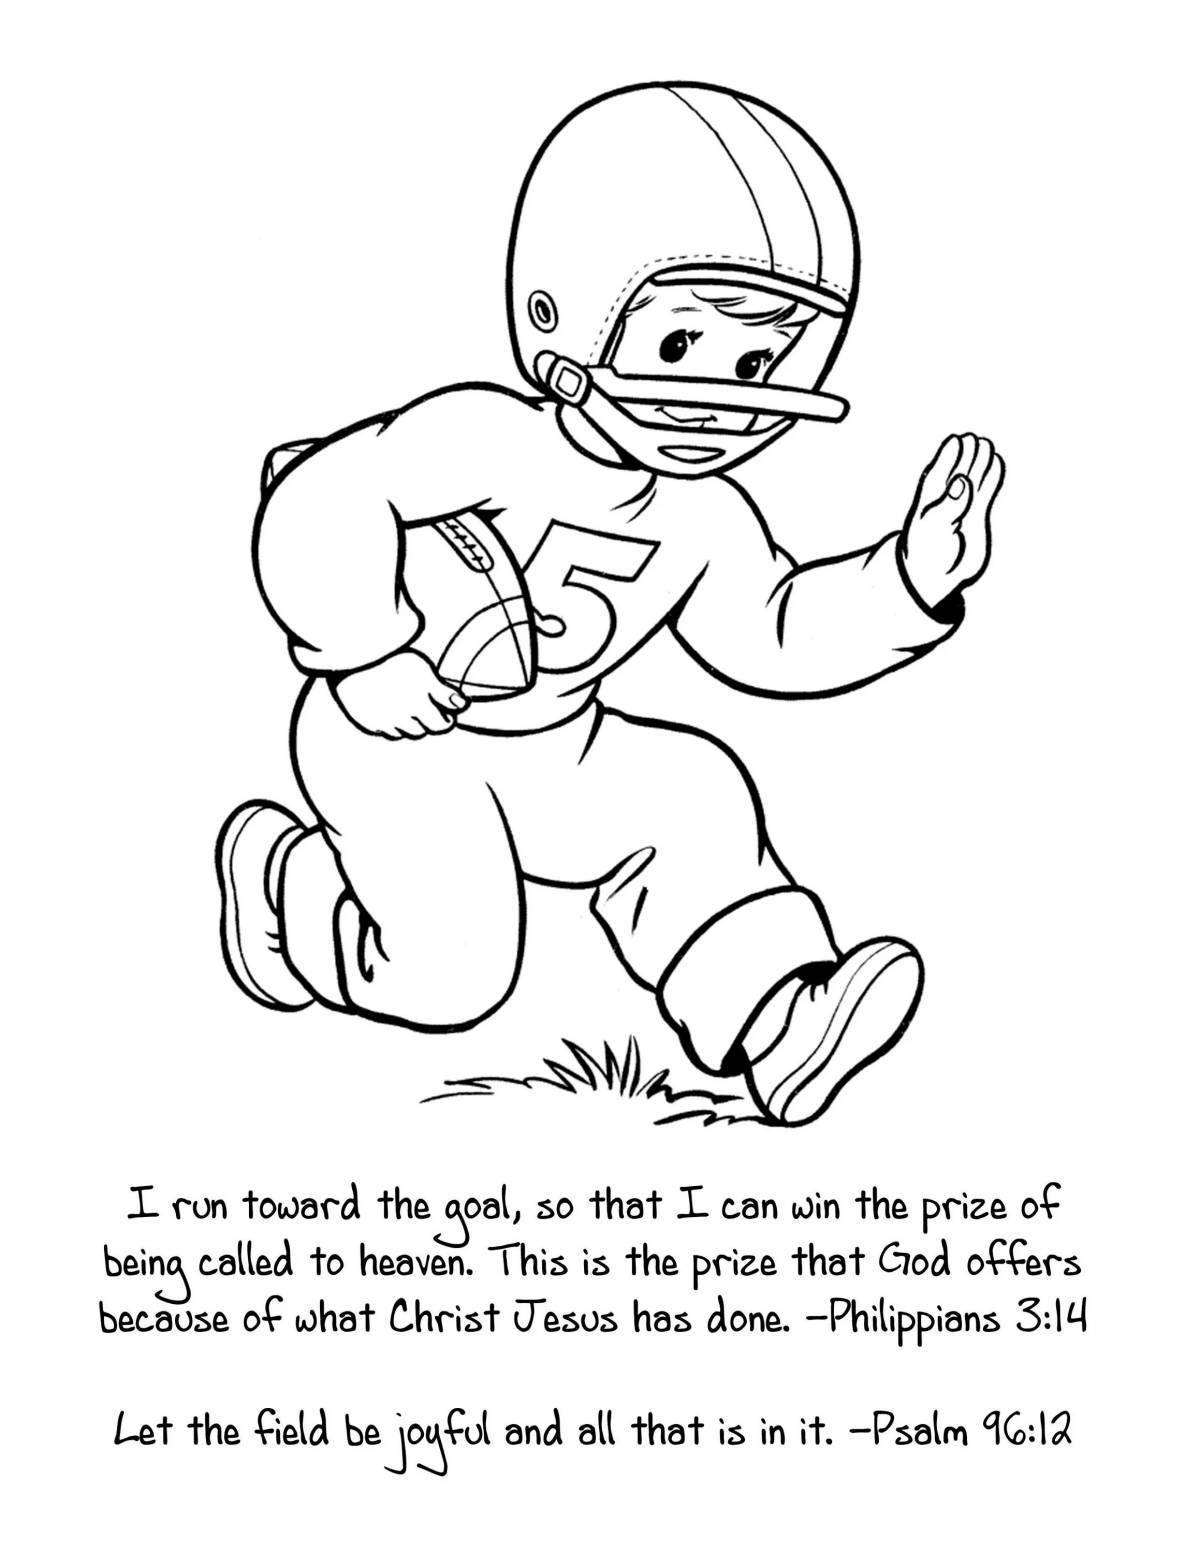 Outstanding sports coloring book for kids